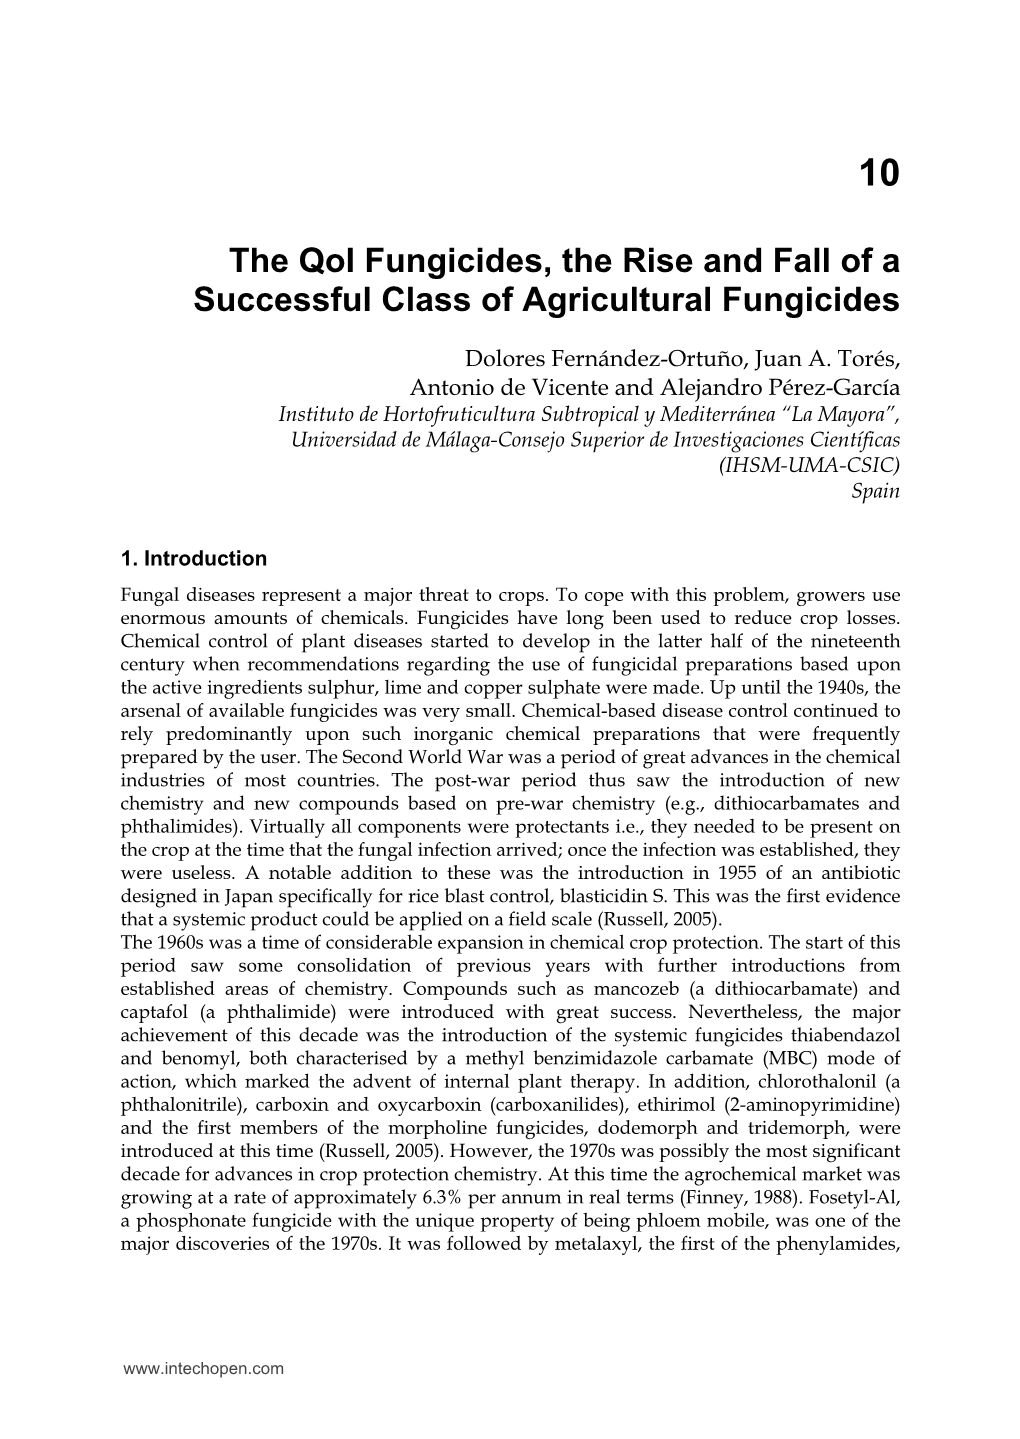 The Qoi Fungicides, the Rise and Fall of a Successful Class of Agricultural Fungicides